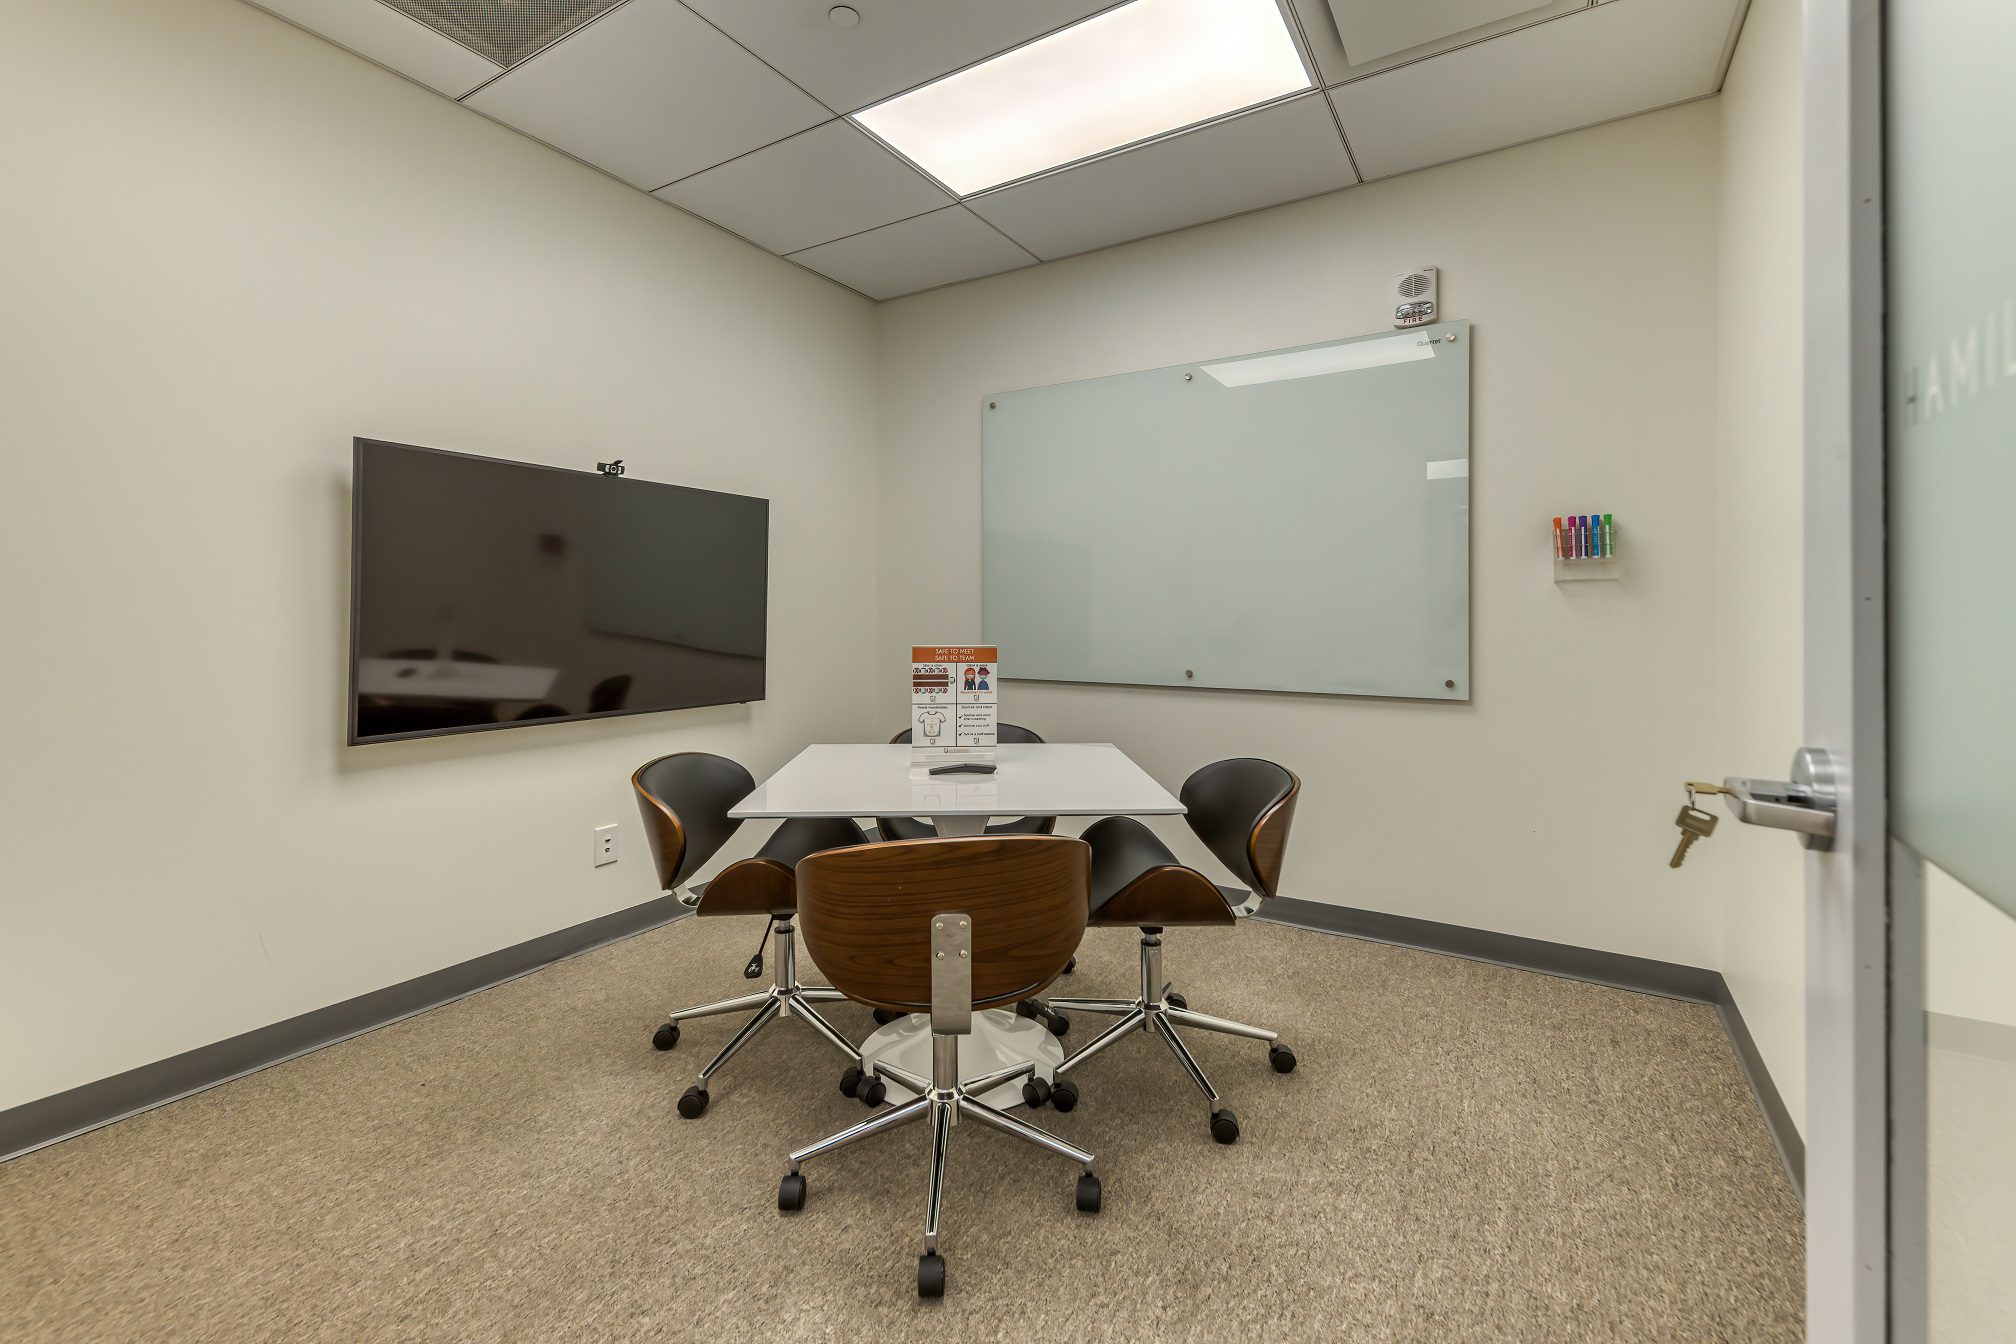 Fully Equipped Conference Room Venue to Enhance Your Business Image